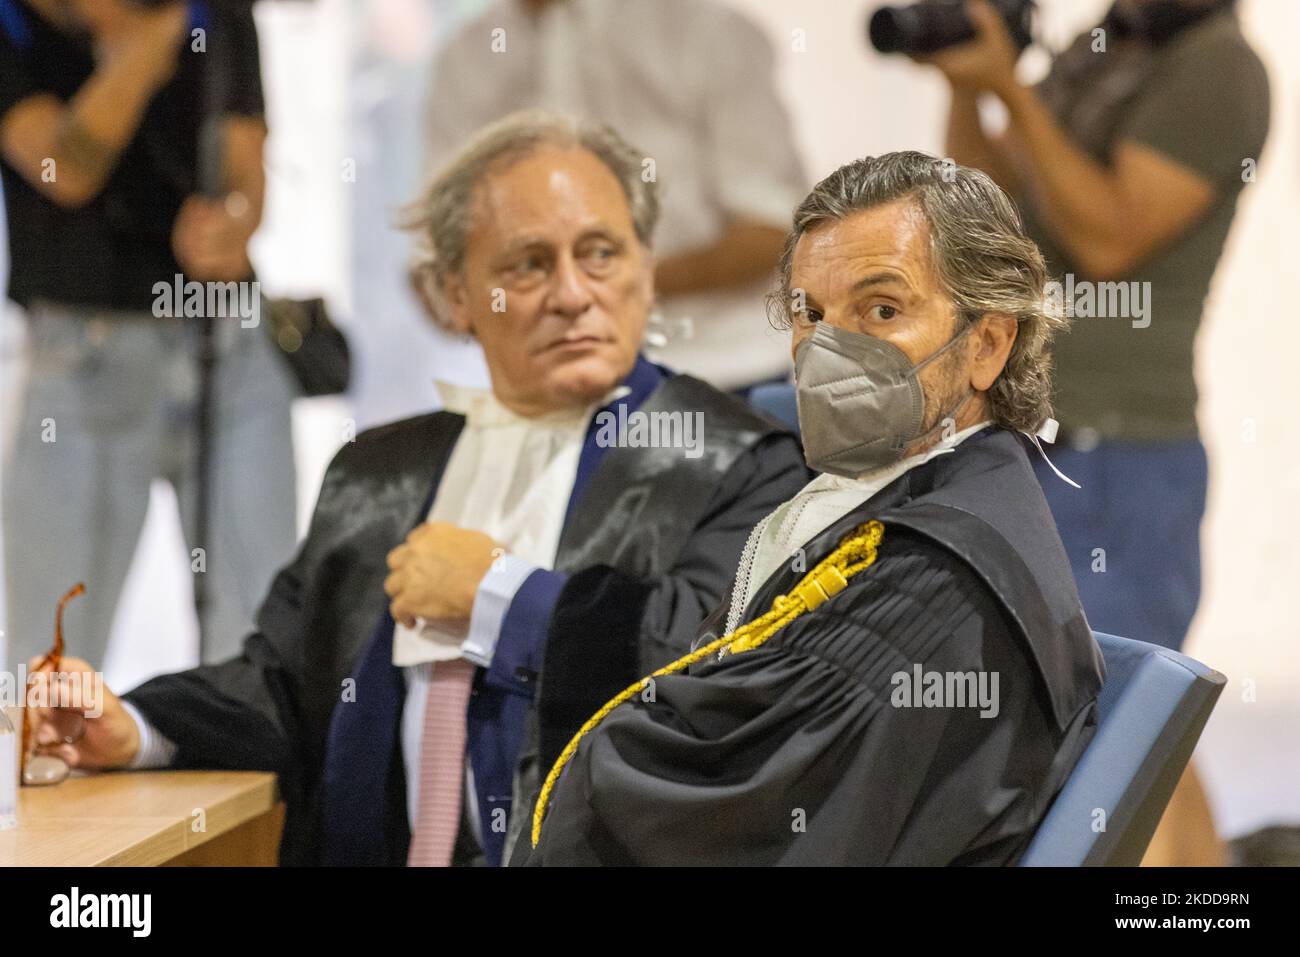 Giovanni Paolo Accinni and Guido Carlo Alleva, lawyers of former CEO of Atlantia Giovanni Castellucci, during the first hearing of the trial for the Morandi bridge collapse at the Genoa's Palace of Justice. The former CEO of Atlantia Giovanni Castellucci (not present today) will be tried, along with 58 others, for the collapse of Genoa's Morandi bridge where forty-three people died on August 14, 2018, after a storm. The relatives of the victims will be able to see the proceedings outside the court on the screen in the conference hall of Genoa court. (Photo by Mauro Ujetto/NurPhoto) Stock Photo